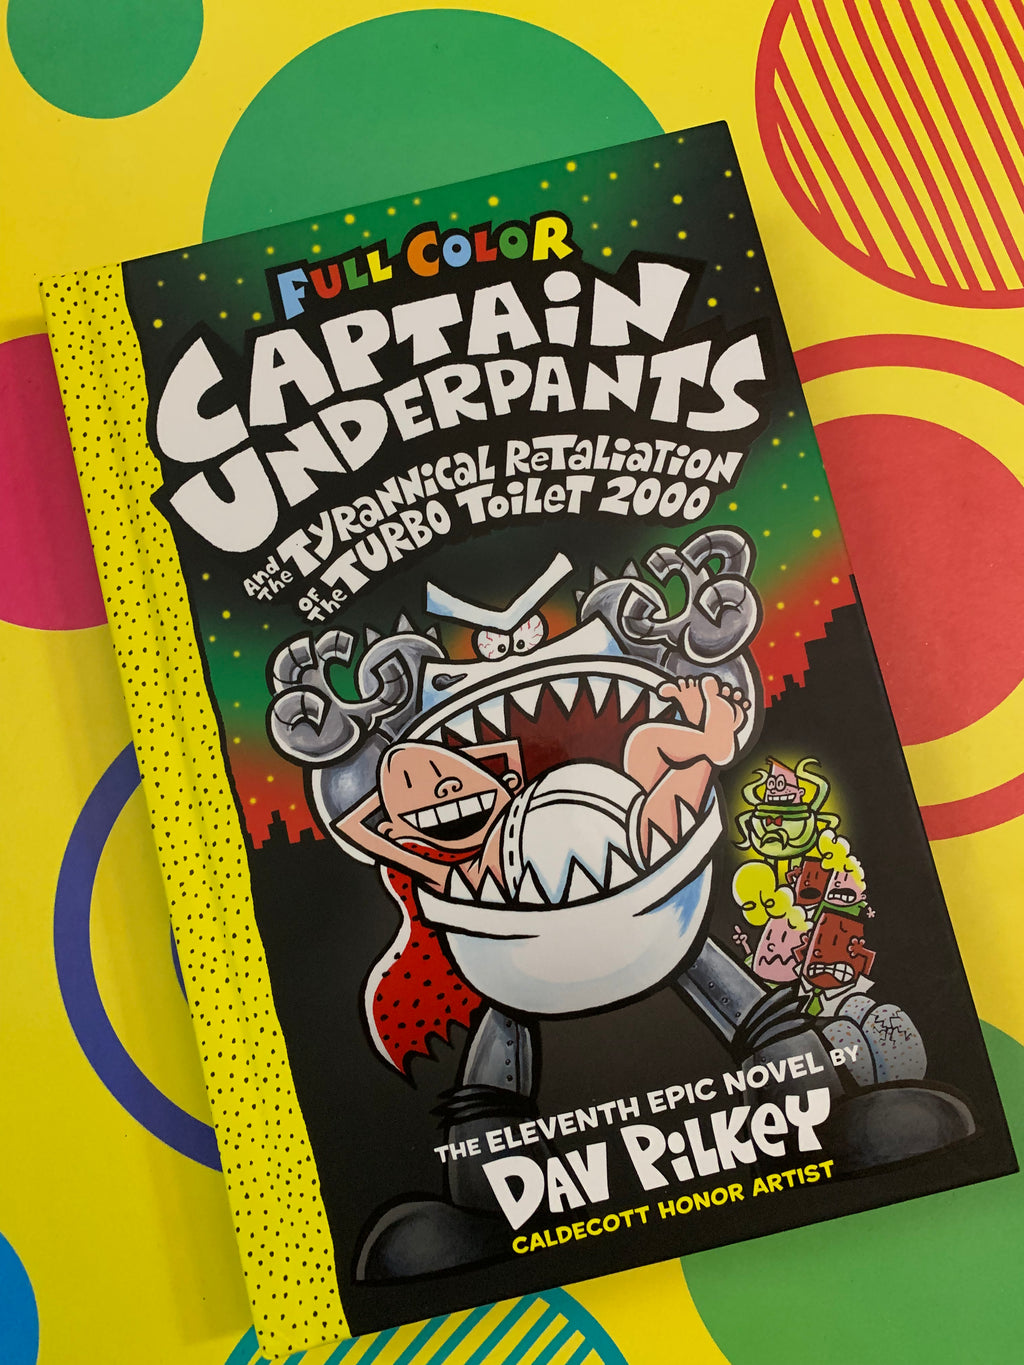 Captain Underpants and the Tyrannical Retaliation of the Turbo Toilet 2000- By Dav Pilkey